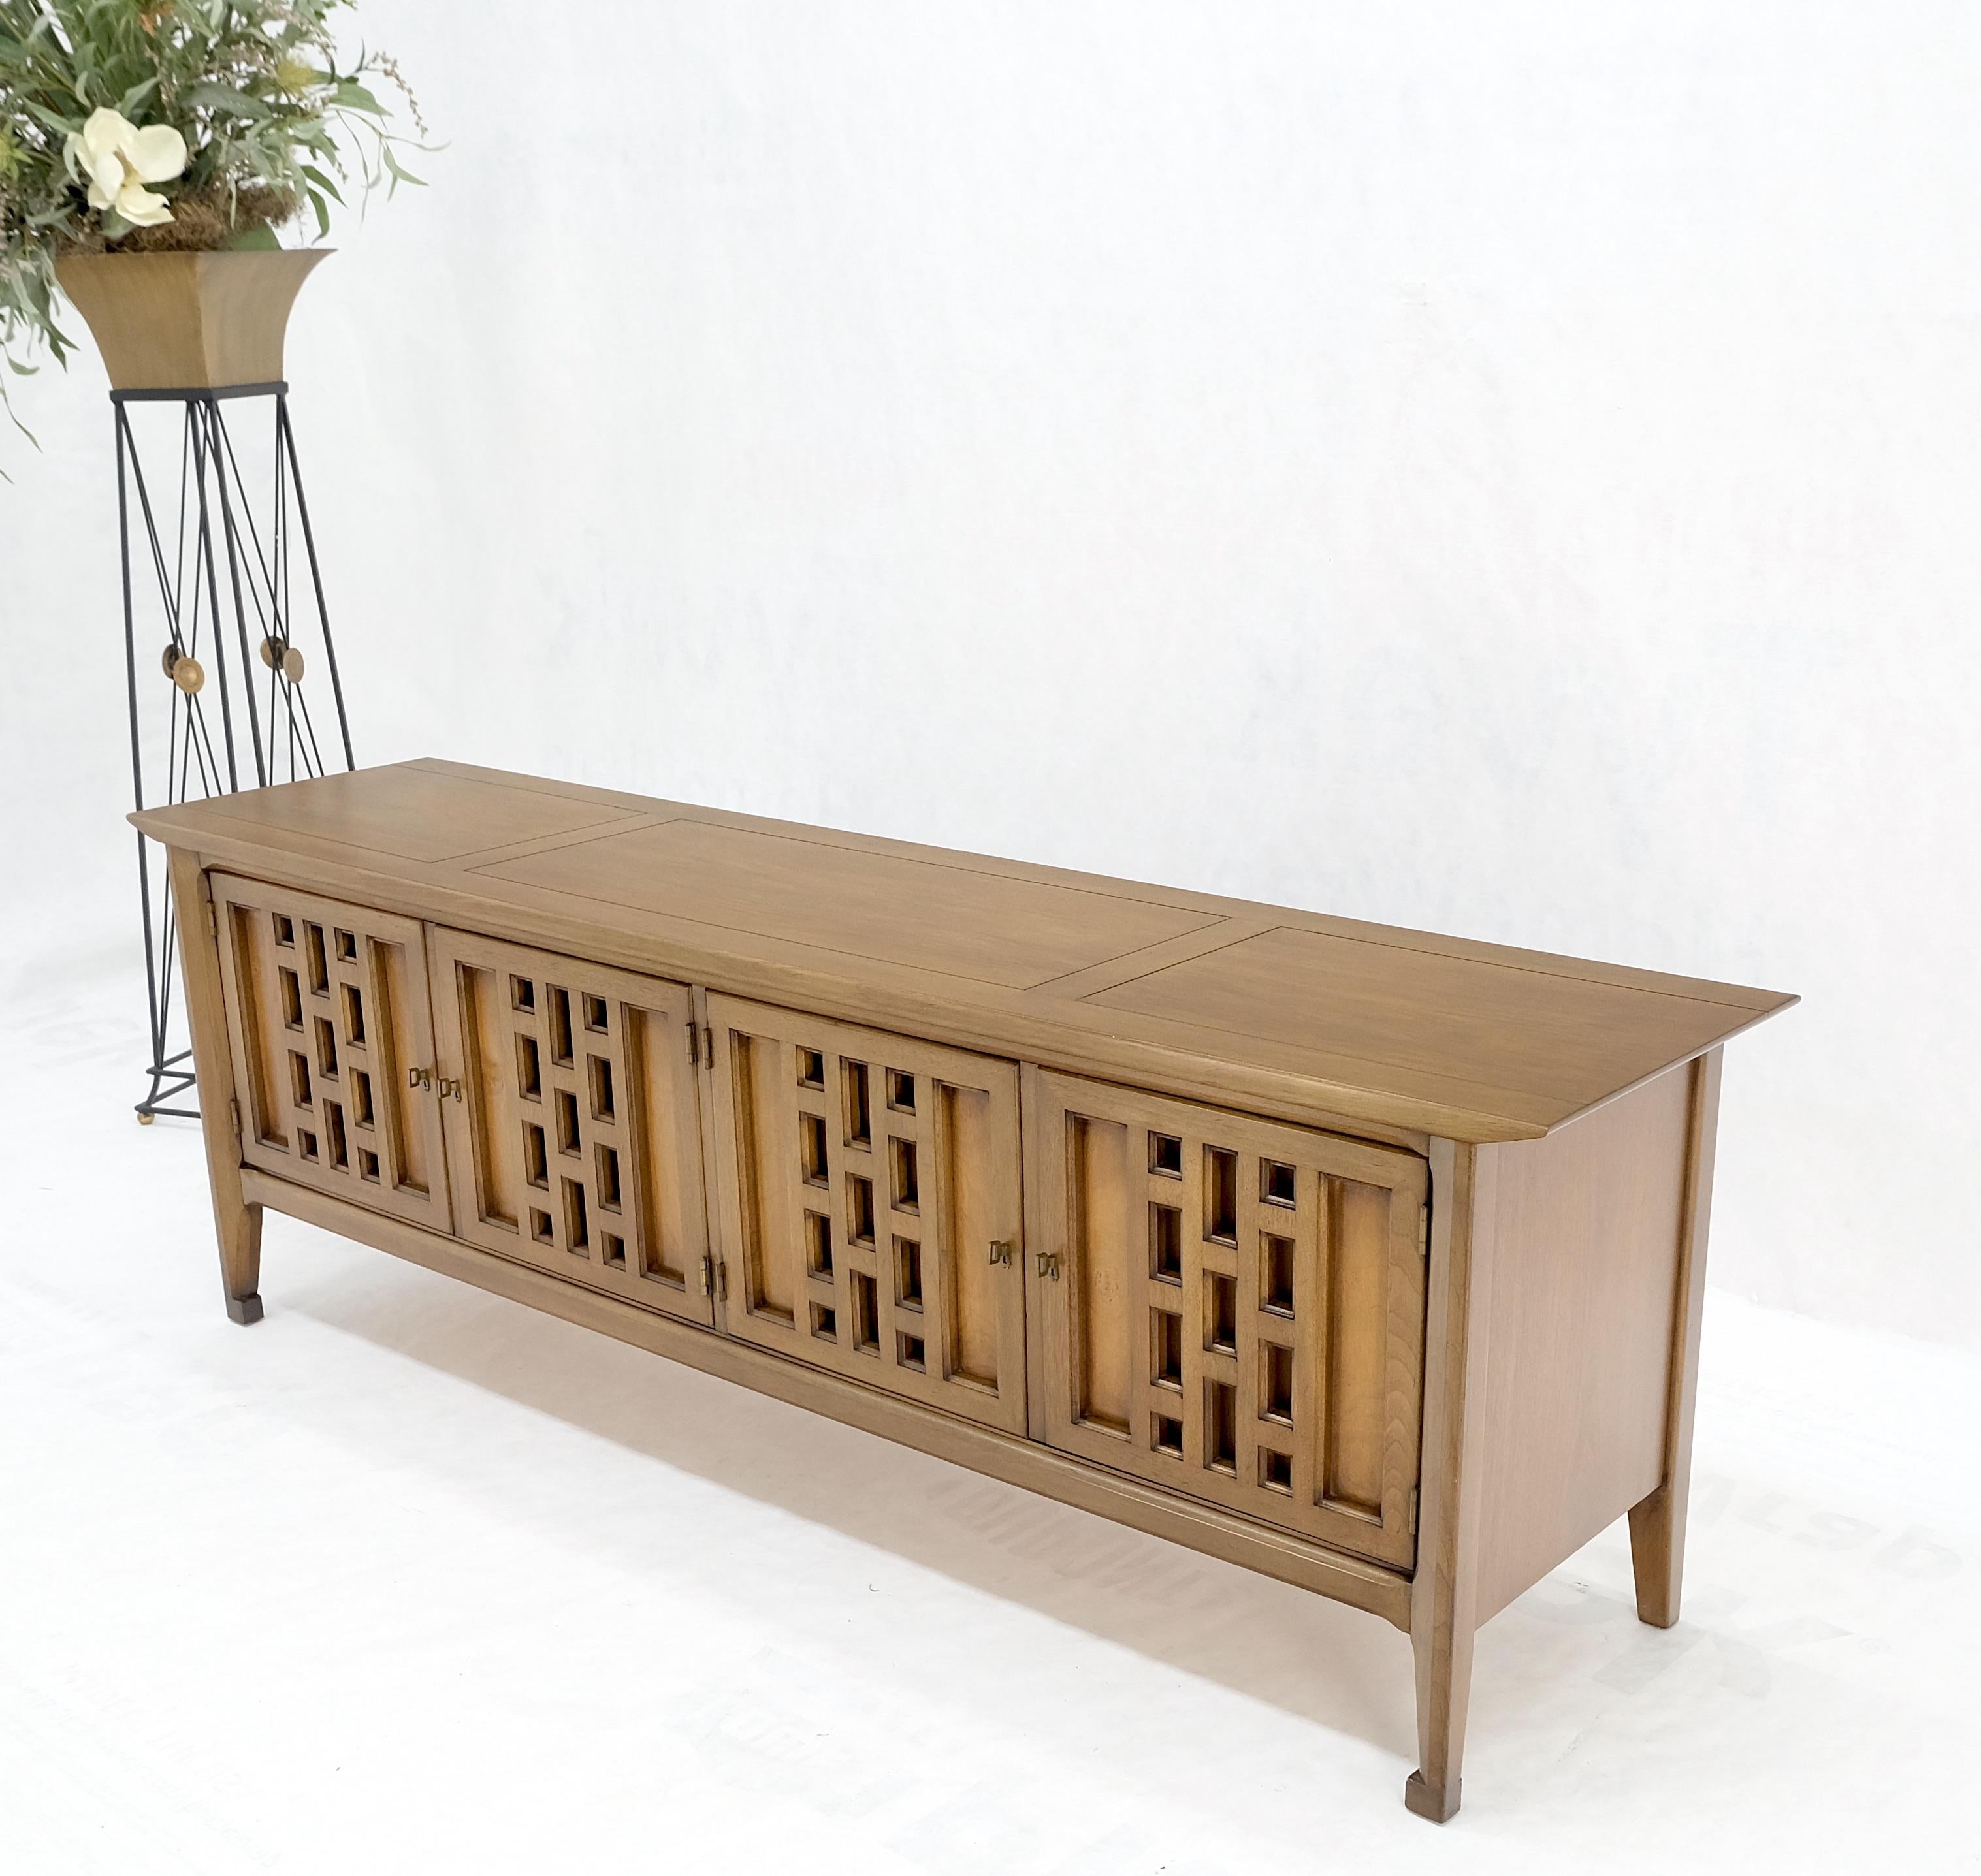 American Low 4 Door 2 Drawers Mid-Century Modern Credenza Light Walnut Finish Mint! For Sale